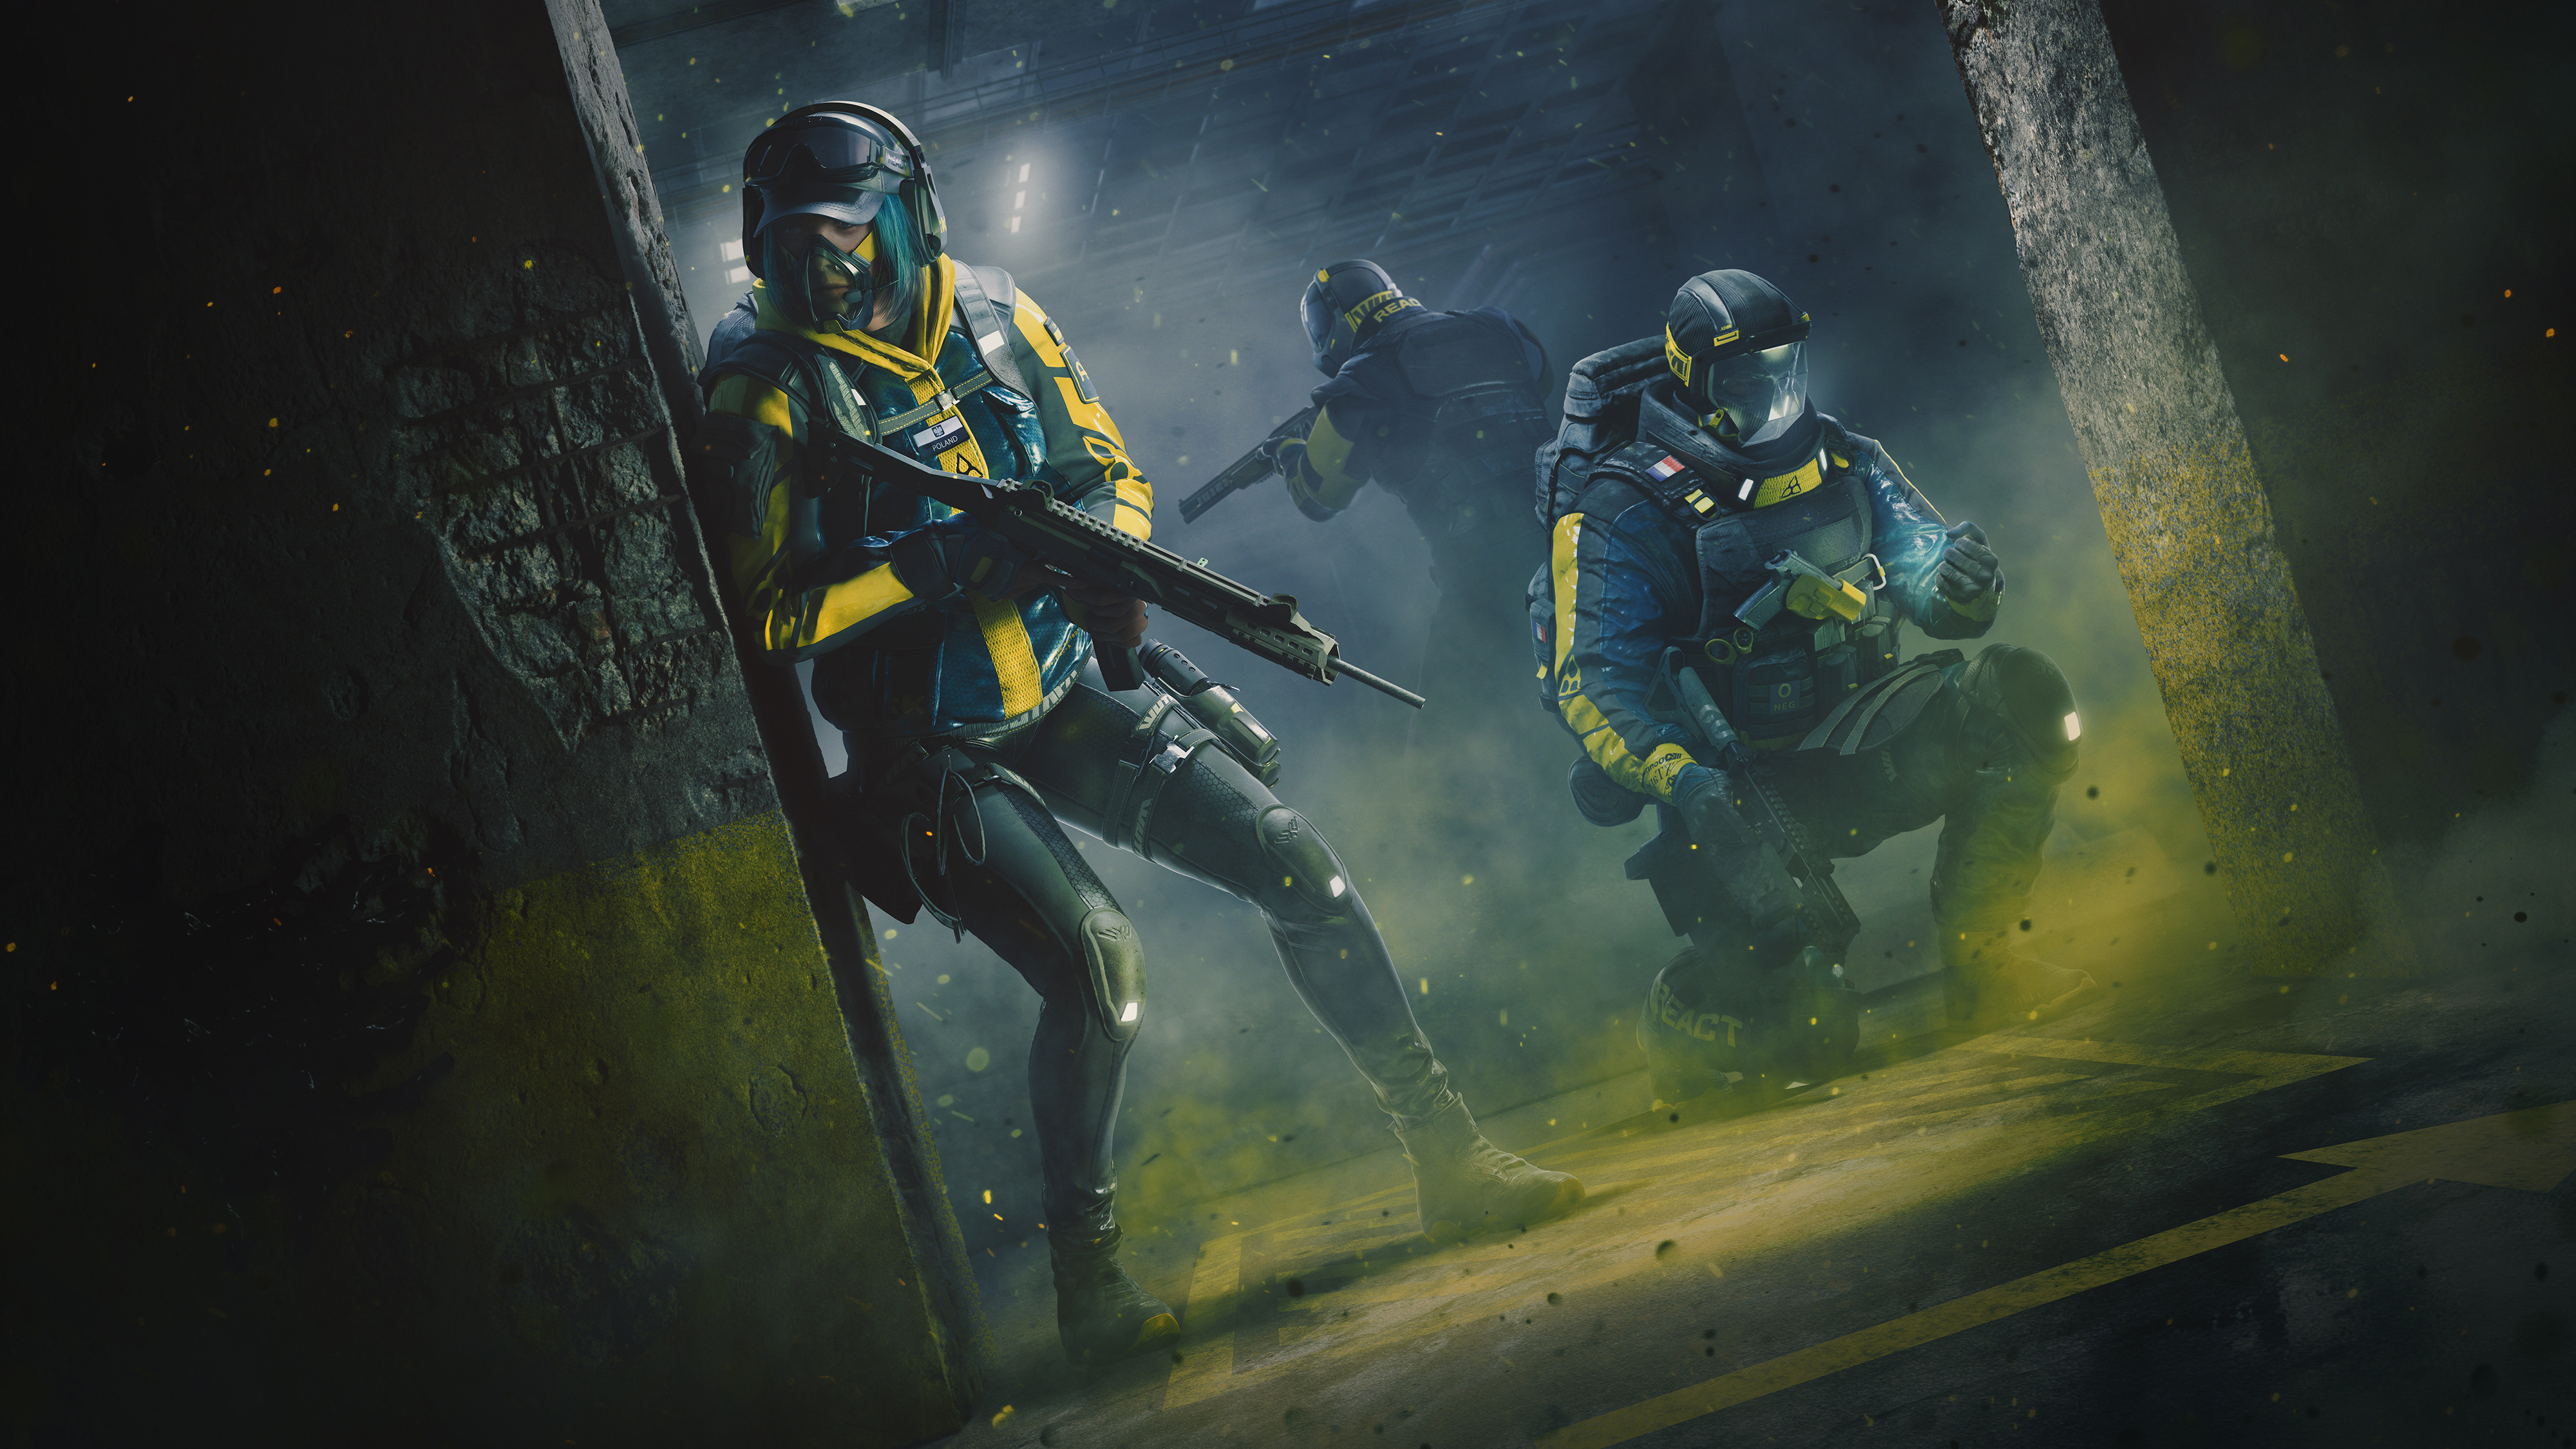 Tom Clancy's Rainbow Six Extraction Wallpaper 4K, E3 Gameplay, 2021 Games, PC Games, Games